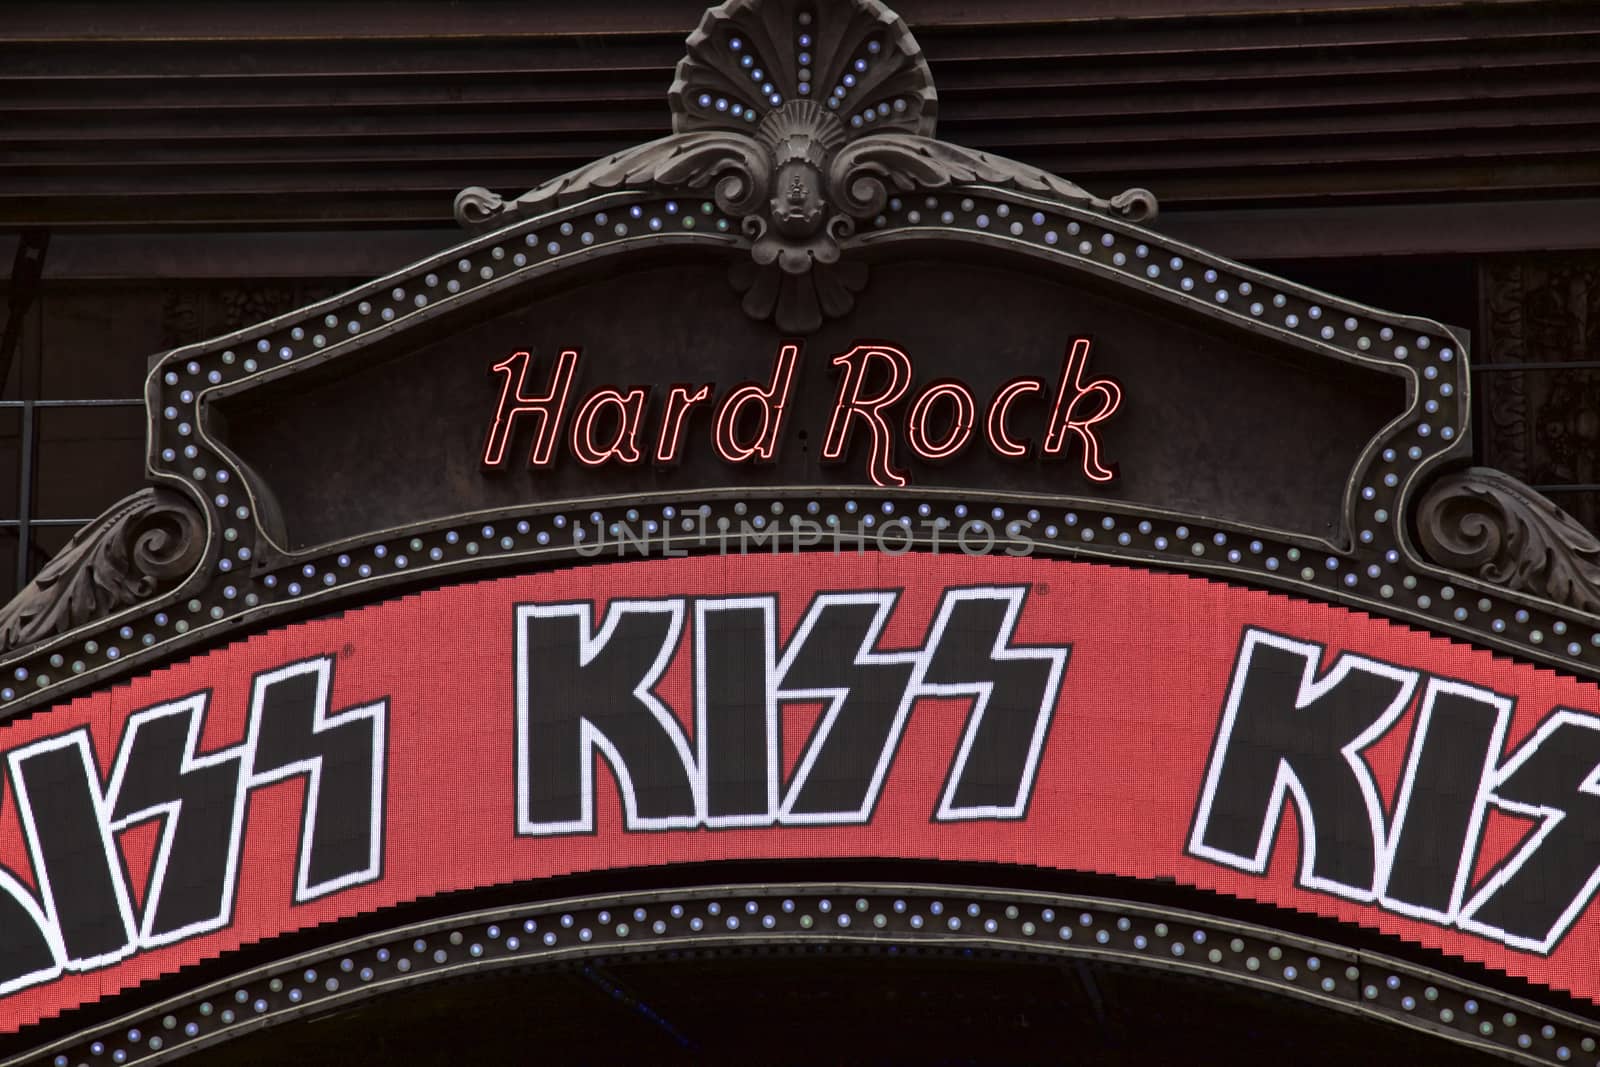 Hard Rock entrance, Kiss Concert in New York City, United States


New York City, United States America - July 18, 2013: Hard Rock entrance, Kiss Concert in New York, United States
